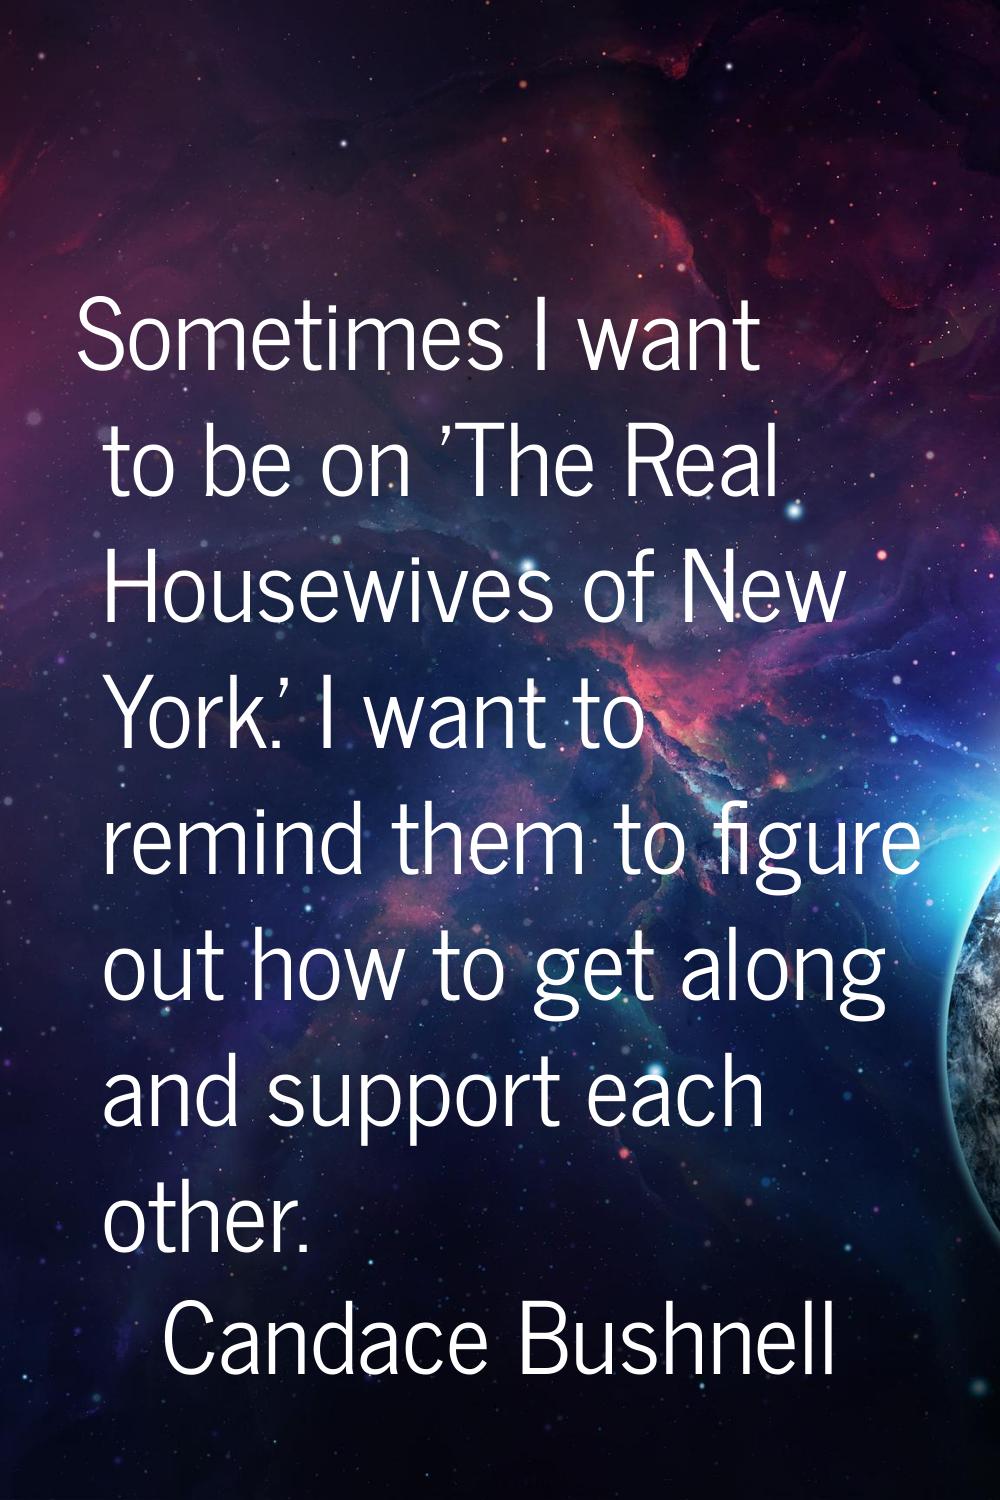 Sometimes I want to be on 'The Real Housewives of New York.' I want to remind them to figure out ho